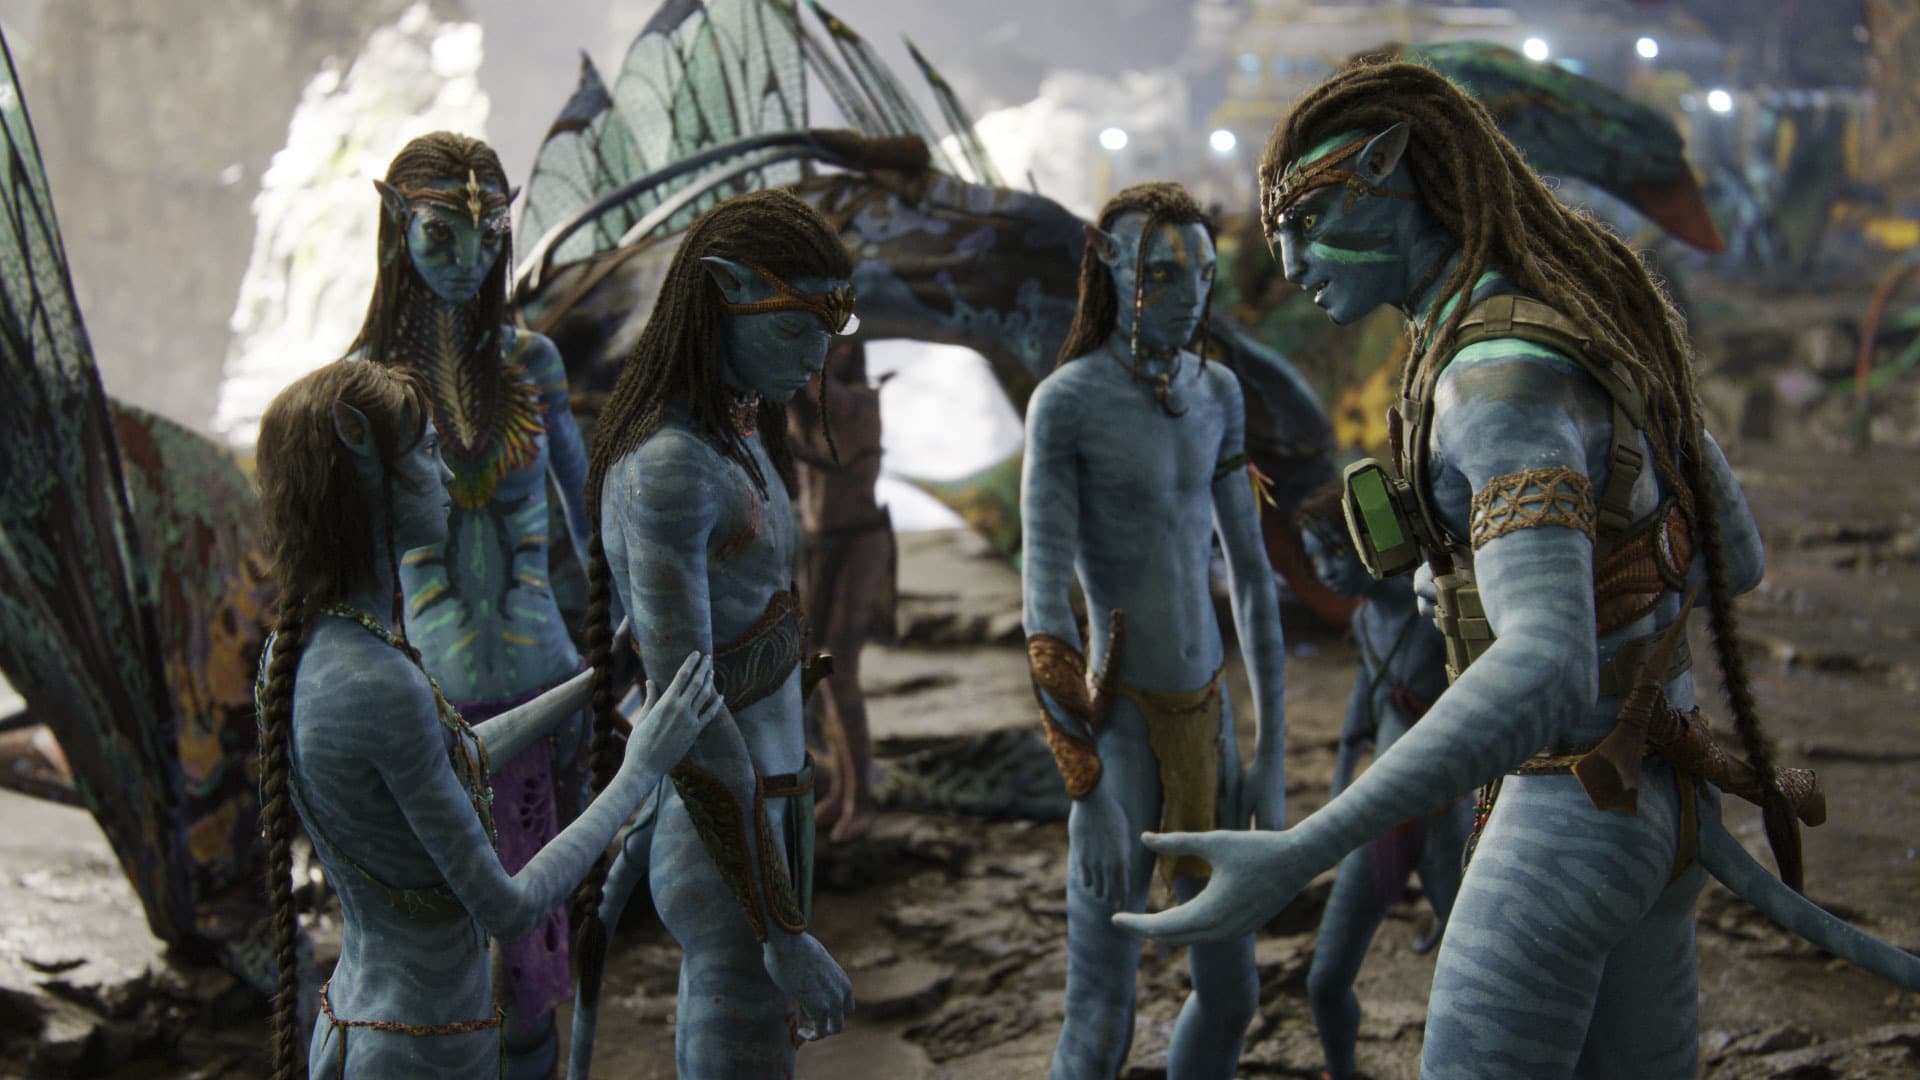 ‘Avatar: The Way of Water’ crosses $1B in ticket sales in just 14 days: Here are..